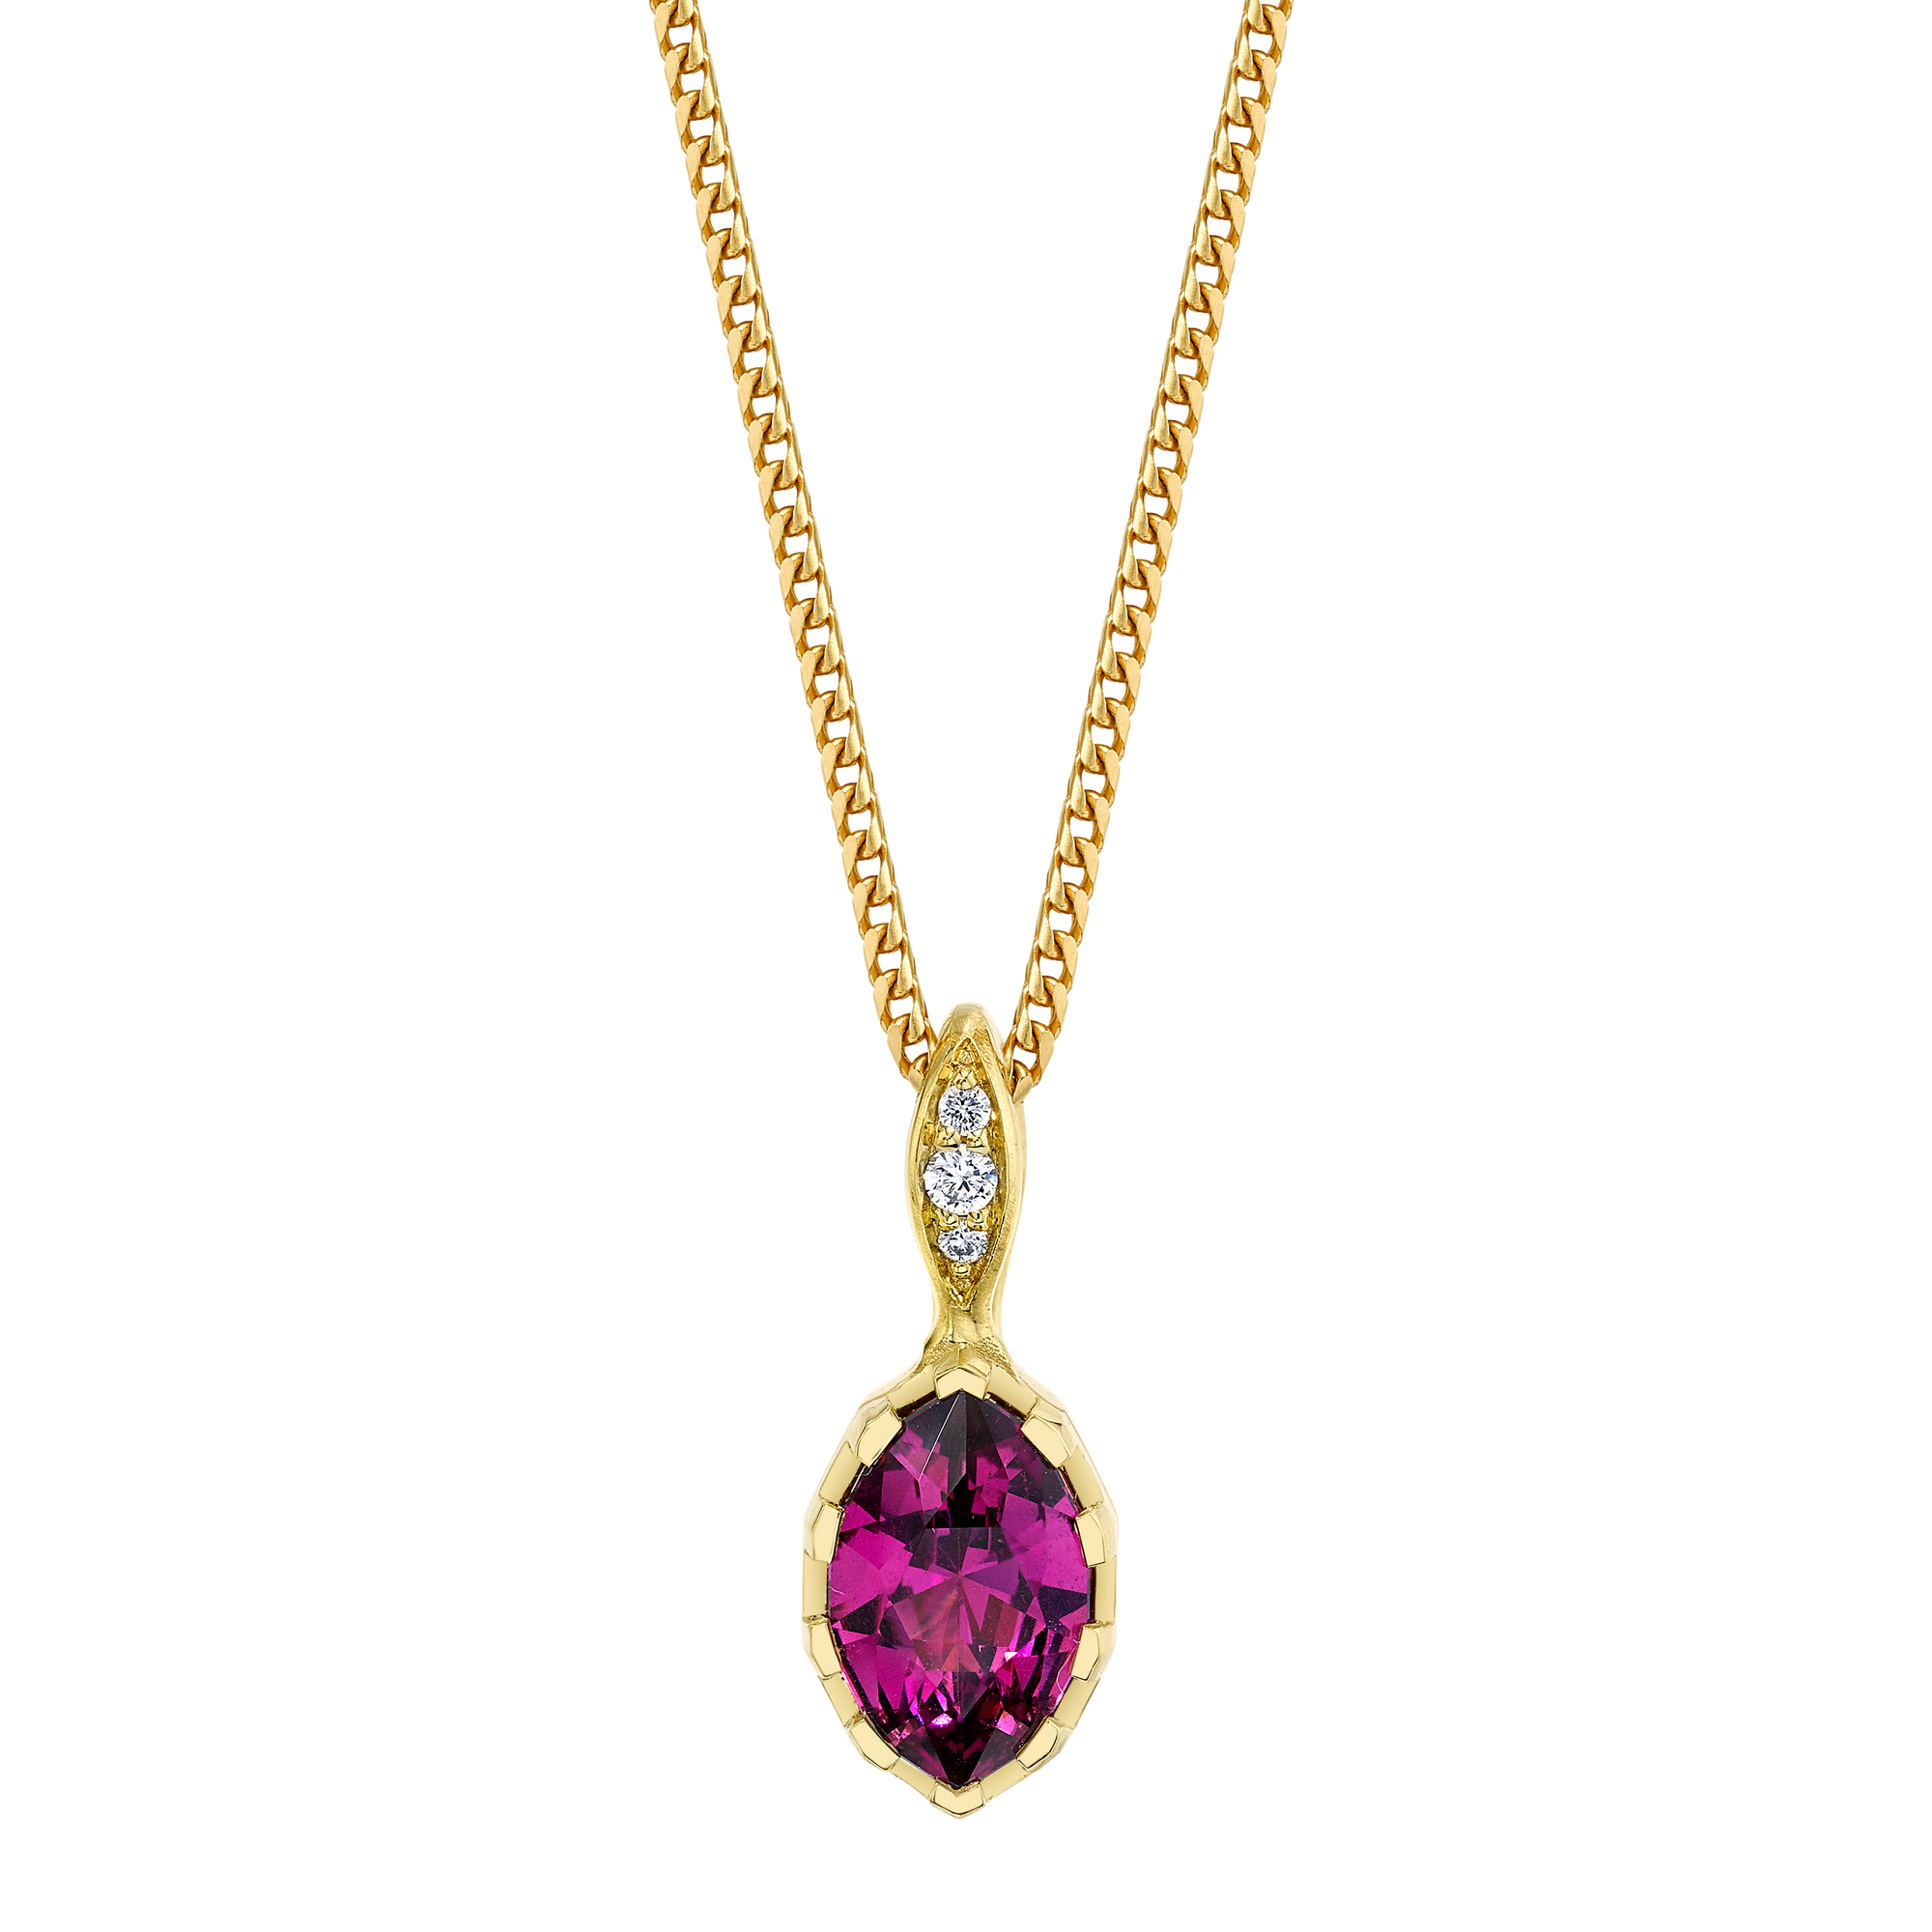 Genesis Necklace featuring a Precision-Cut Raspberry Garnet with Diamond Pave